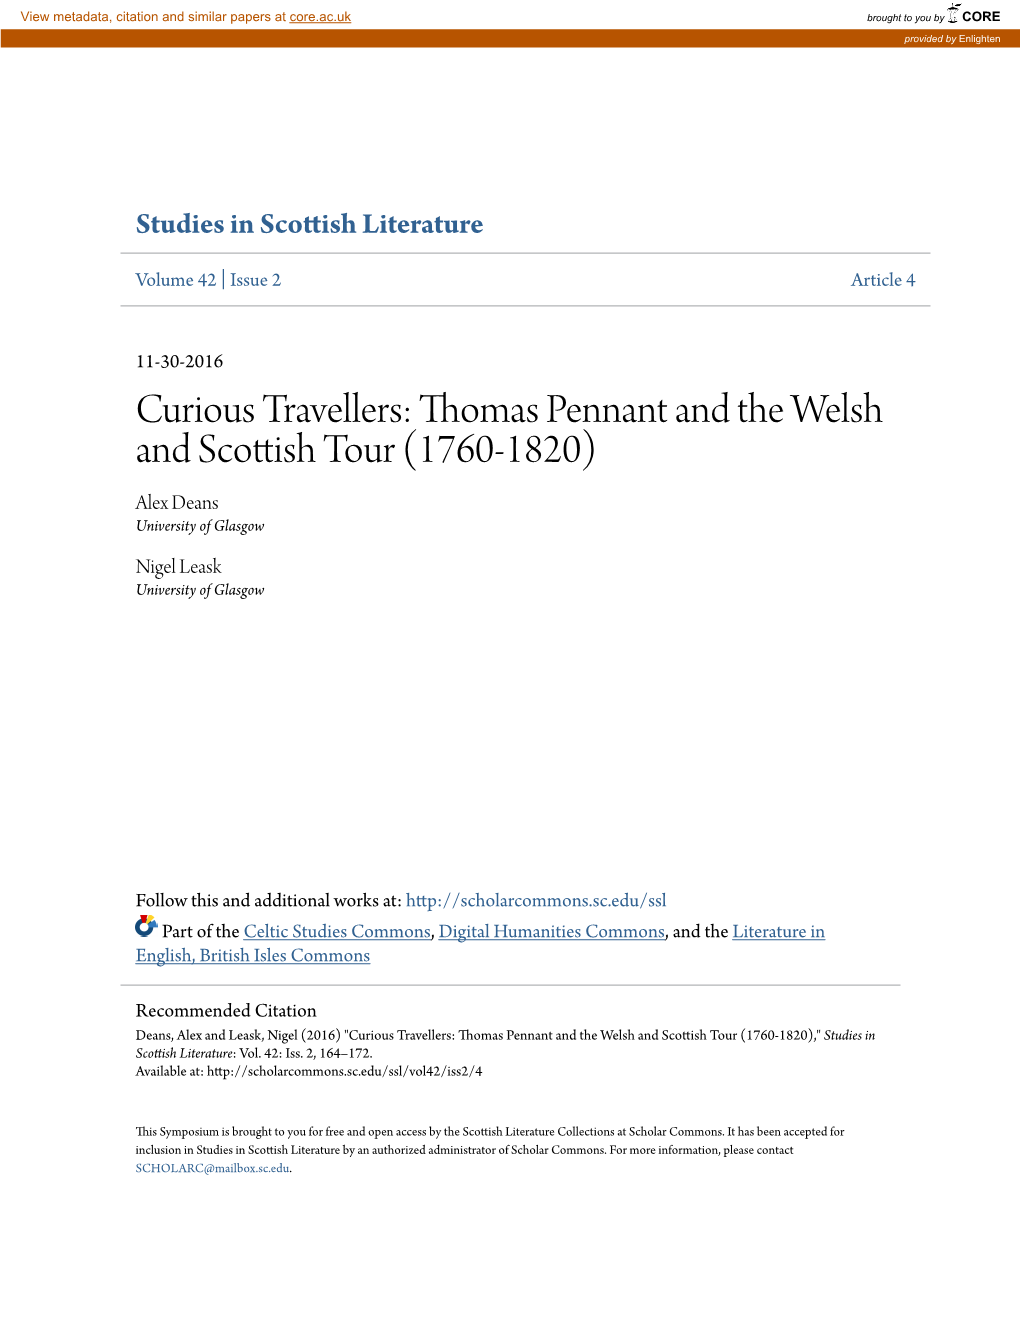 Thomas Pennant and the Welsh and Scottish Tour (1760-1820) Alex Deans University of Glasgow